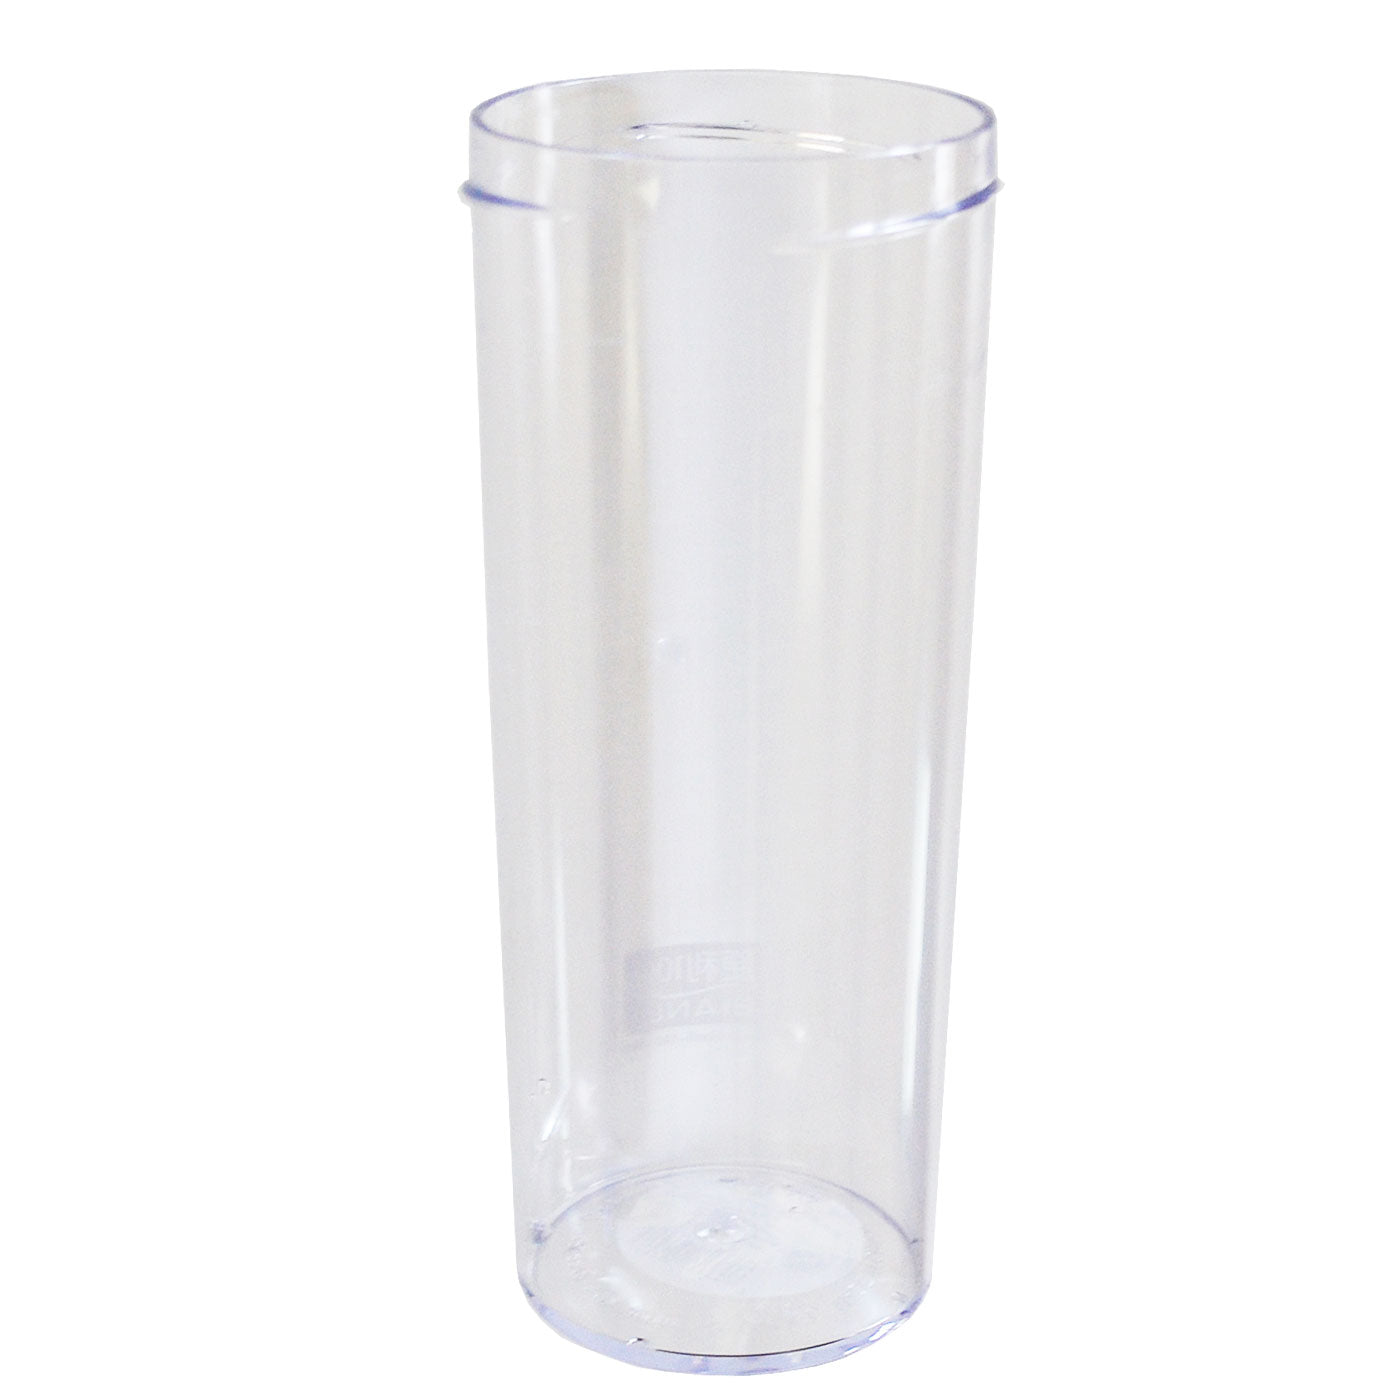 east to clean drink bottle glass